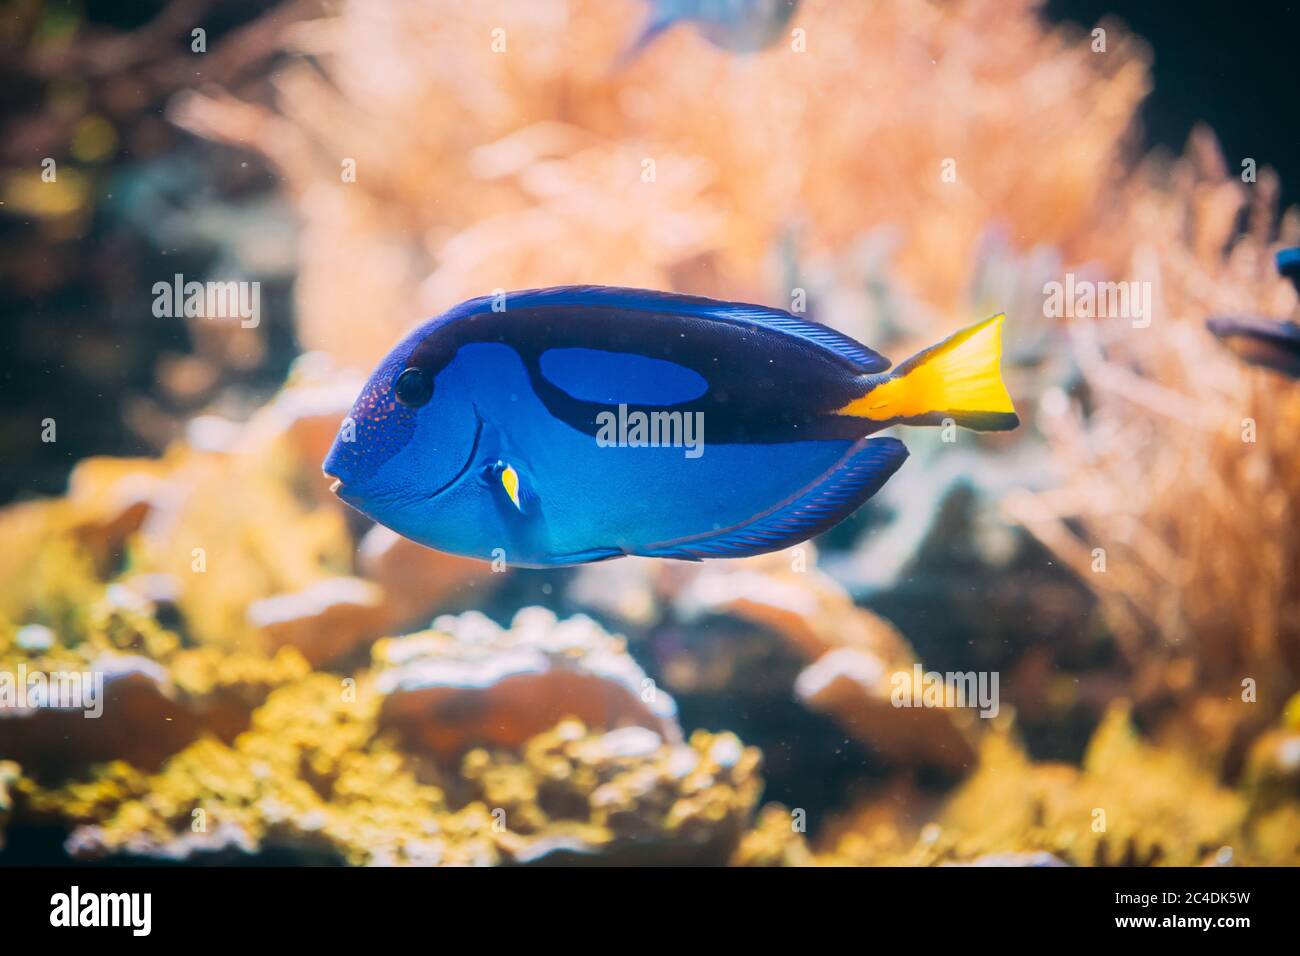 Blue Tang Fish Paracanthurus Hepatus Swimming In Water. Popular Fish In Marine Aquarium, Needs A Large Coral Aquarium To Be Able To Live In Captivity Stock Photo